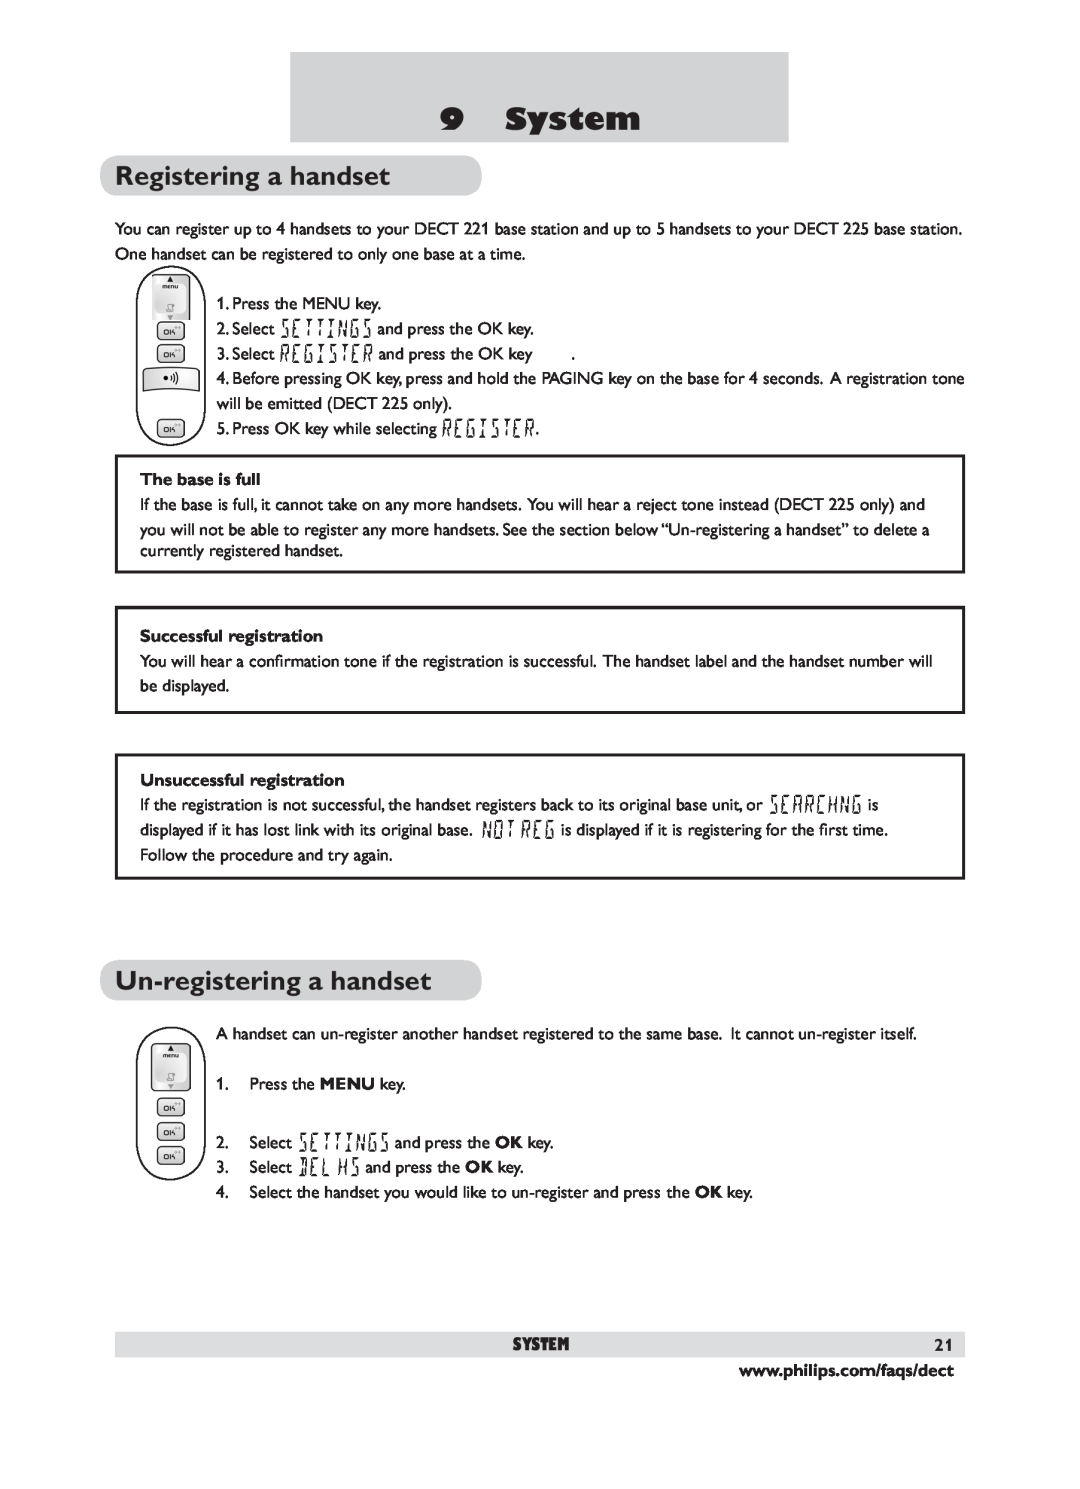 Philips DECT 221 user manual System, Registering a handset, Un-registering a handset 